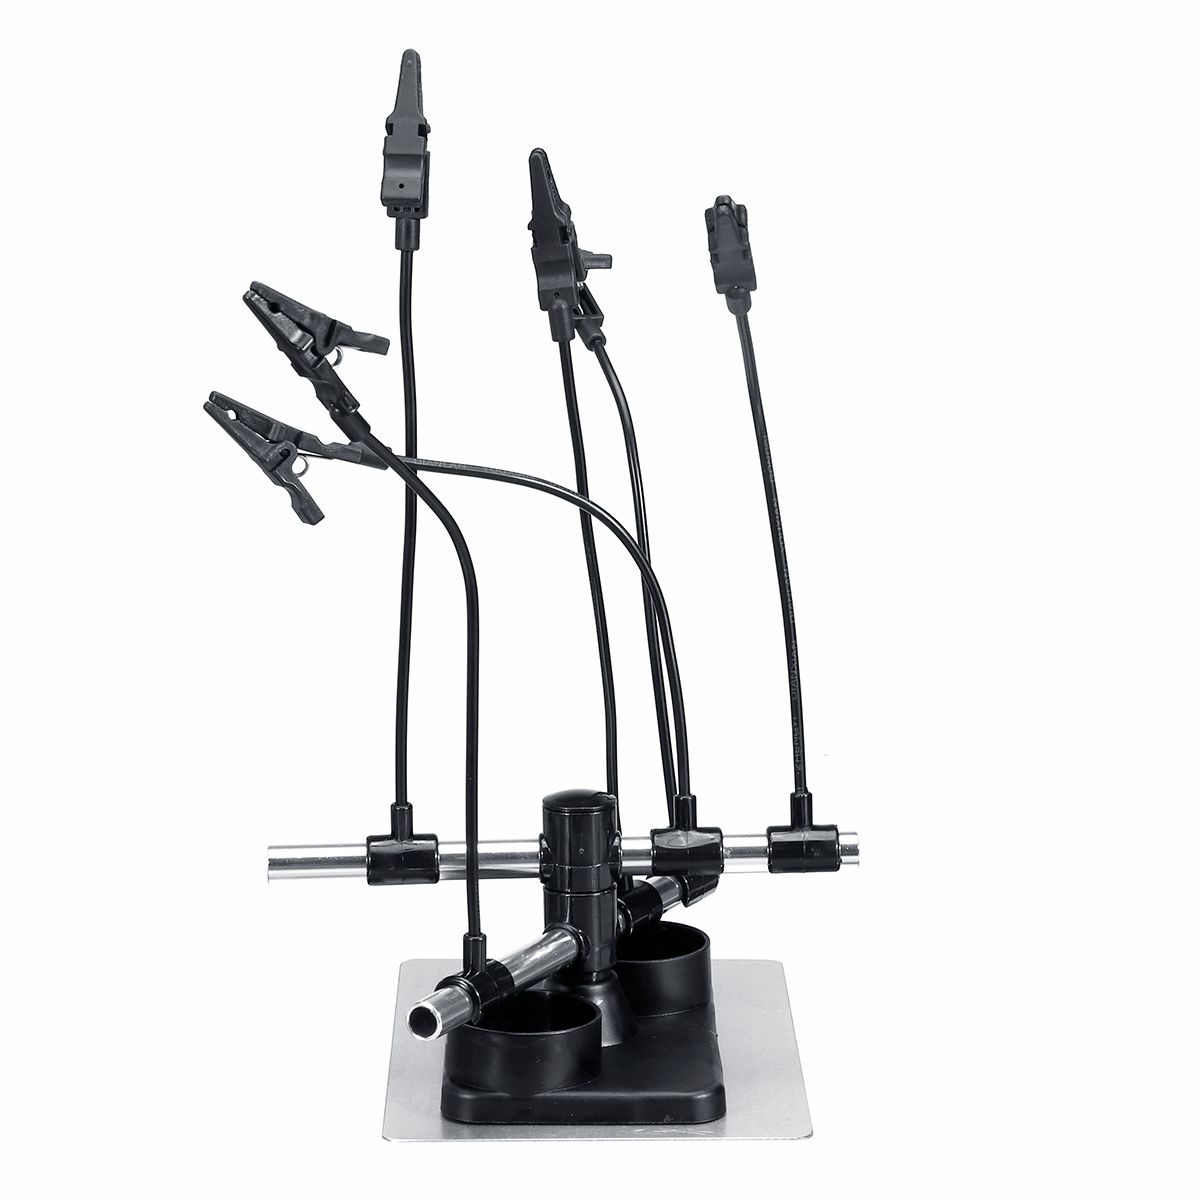 Airbrush-amp-Spray-G-un-Part-Holder-Clip-Stand-Hold-Model-Hobby-Auto-Painting-Brush-Booth-1512919